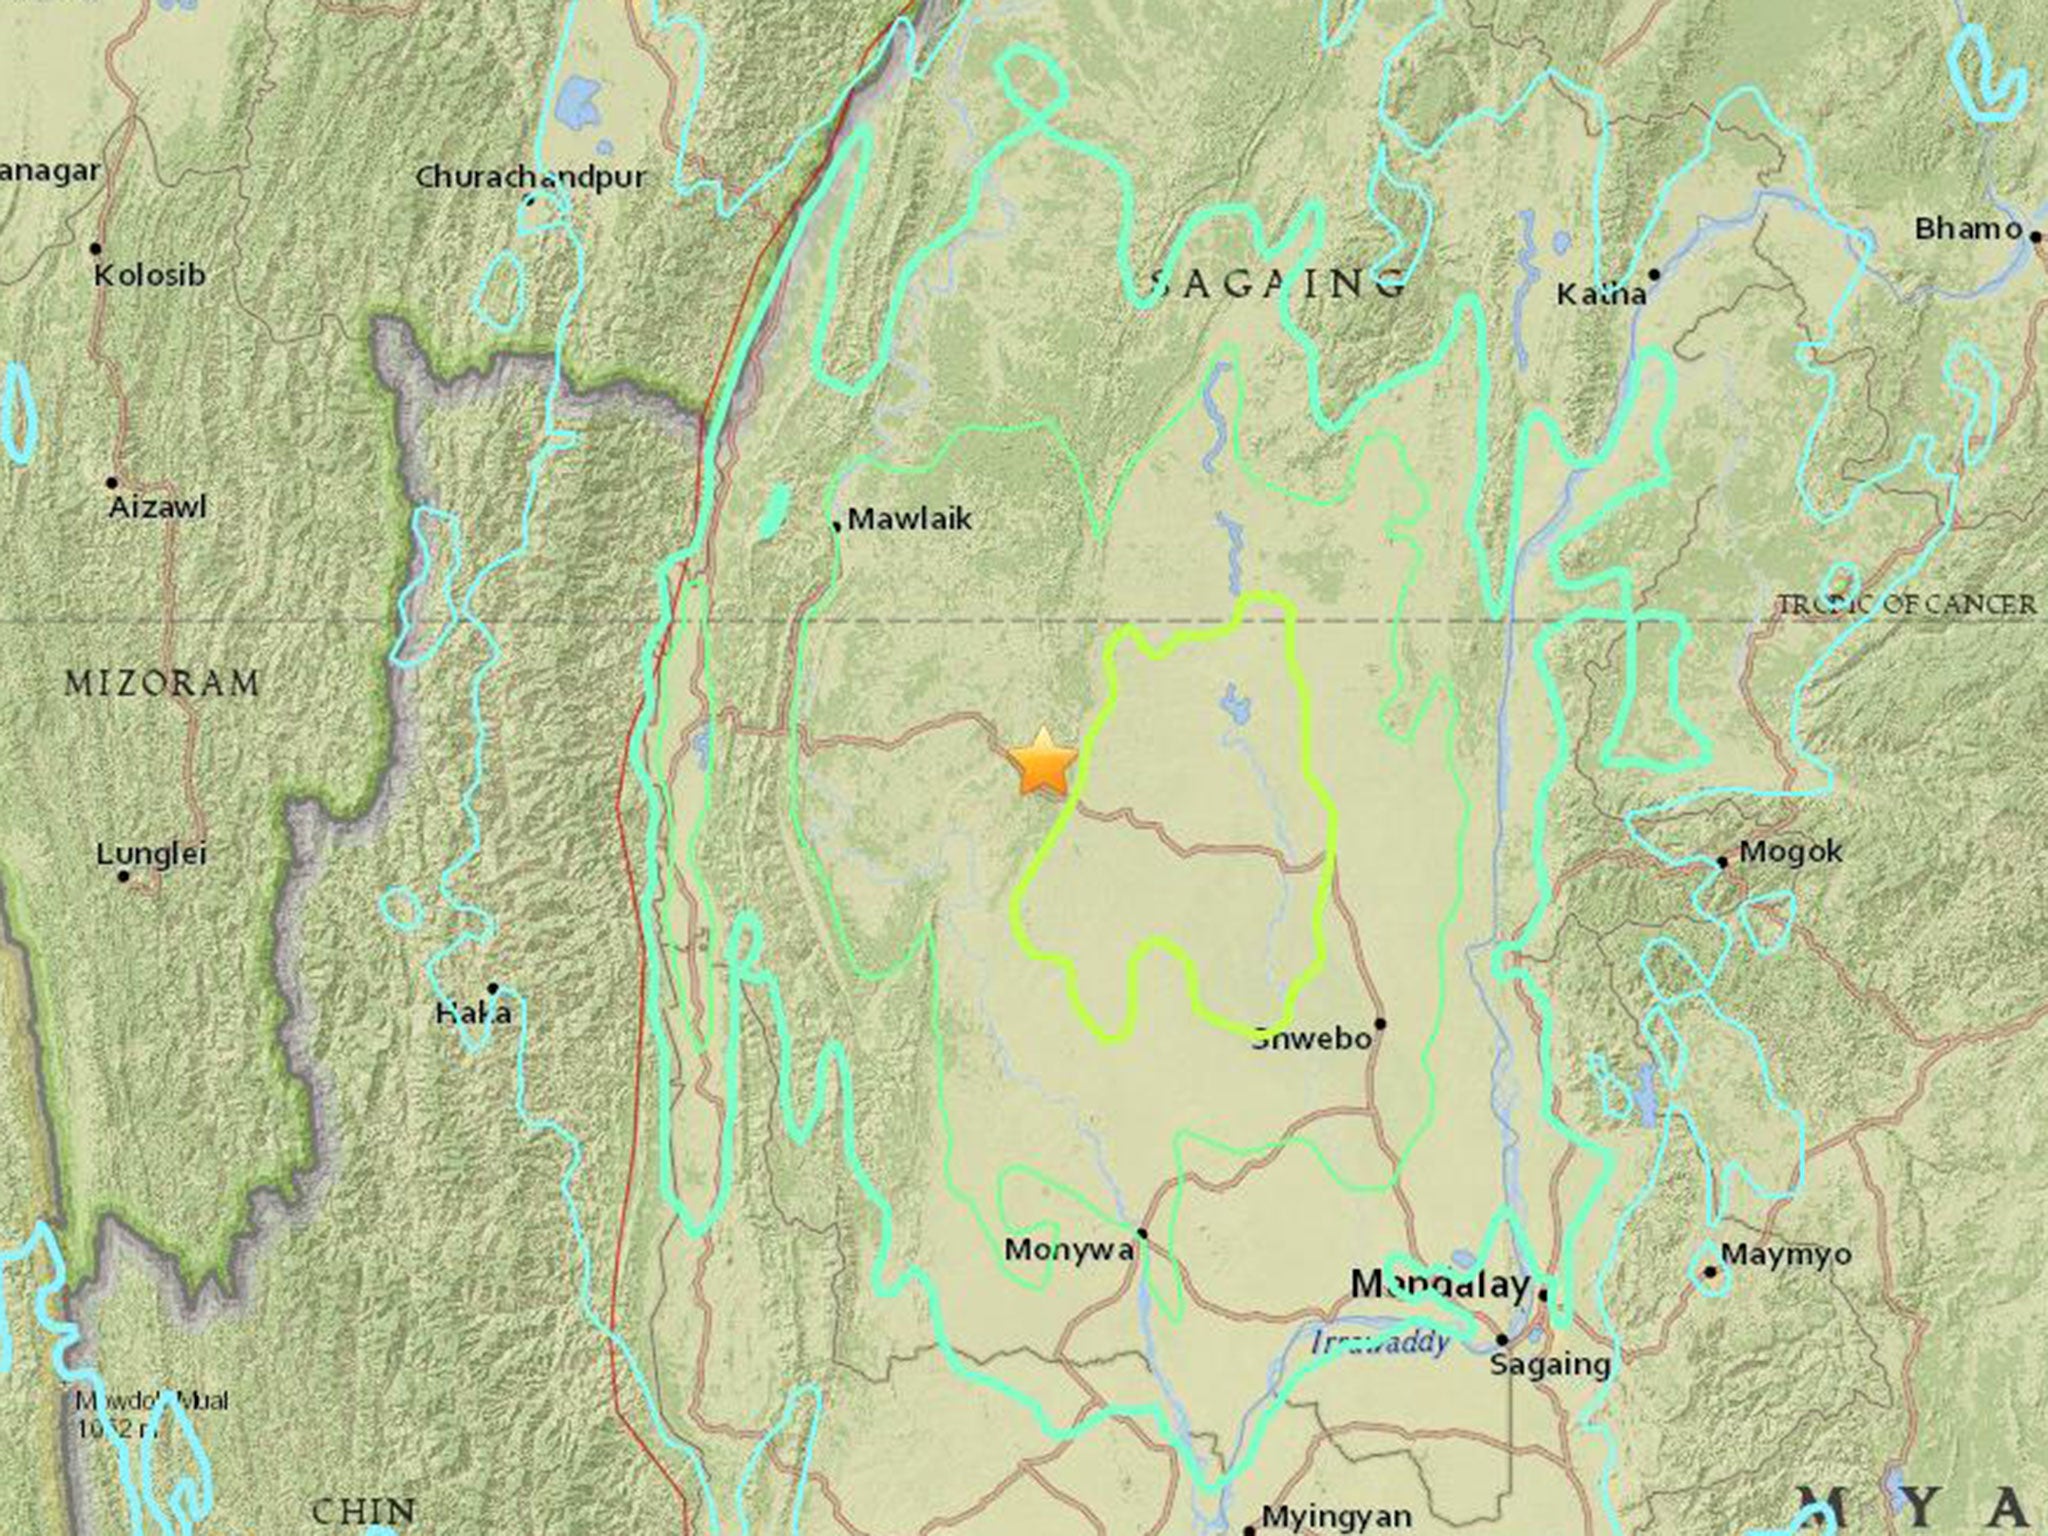 The epicentre of the earthquake in Burma on 13 April 2016